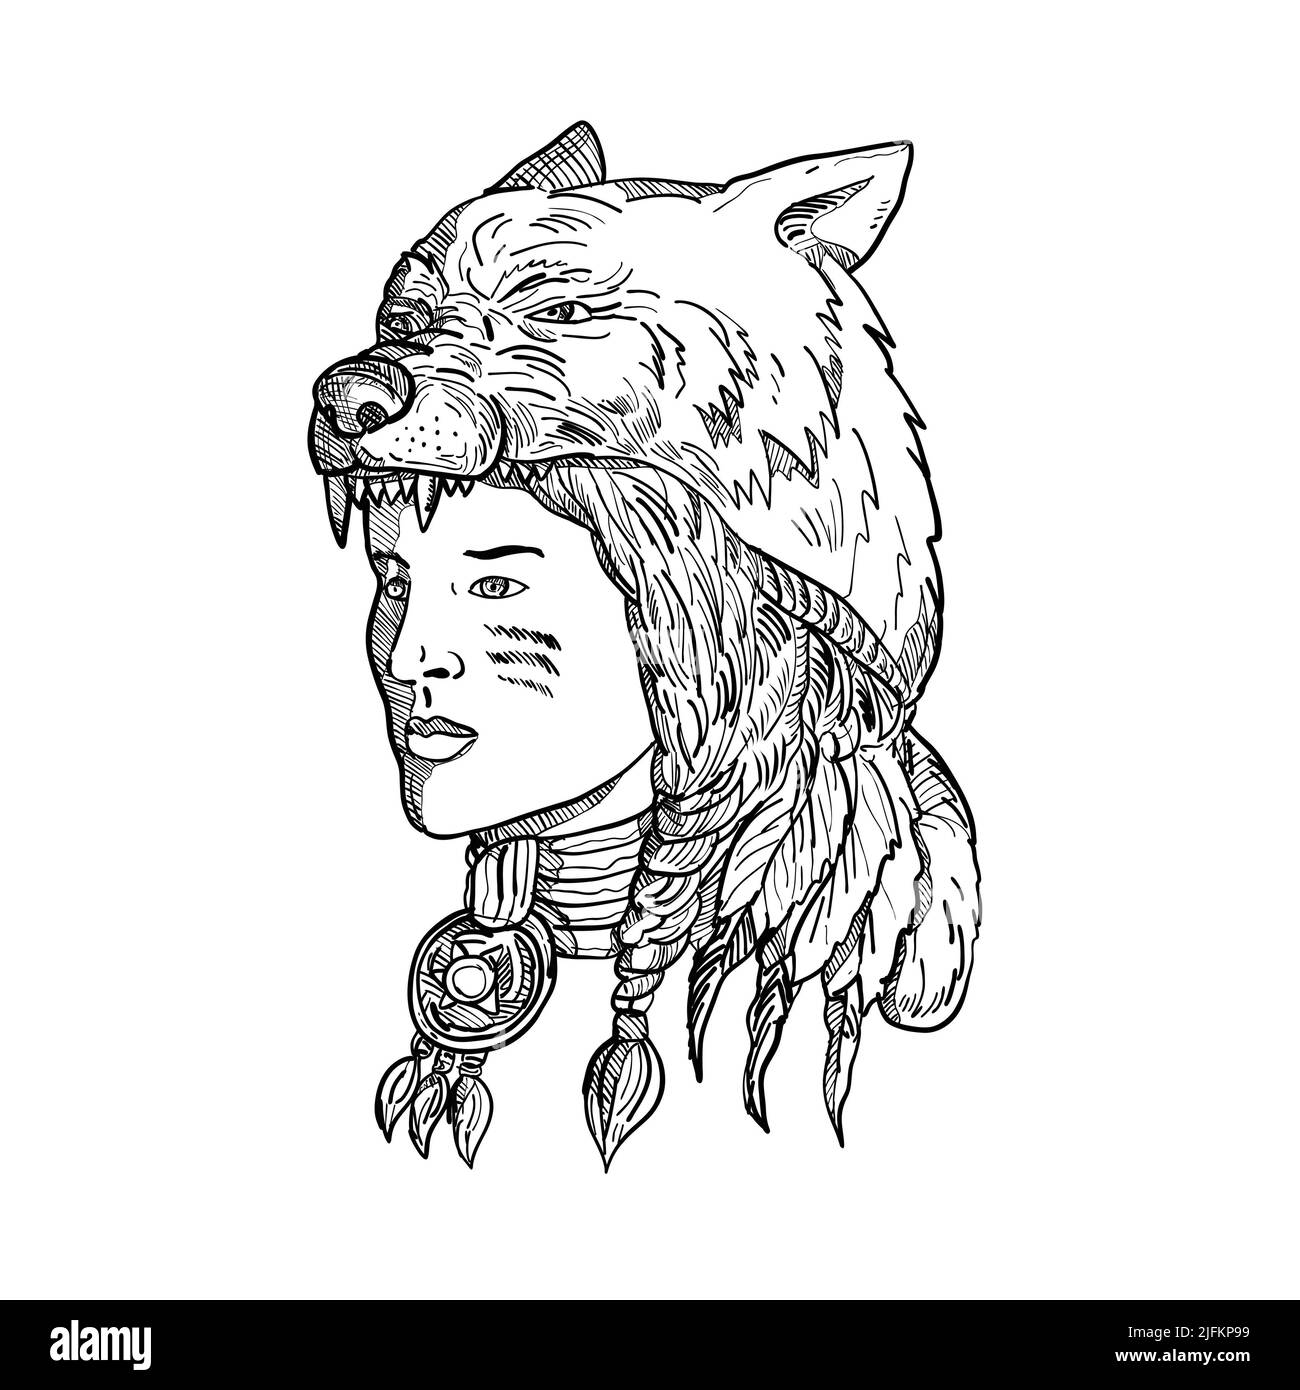 Drawing sketch style illustration of a native American woman wearing a wolf headdress, headgear or headwear looking to side in black and white on Stock Photo